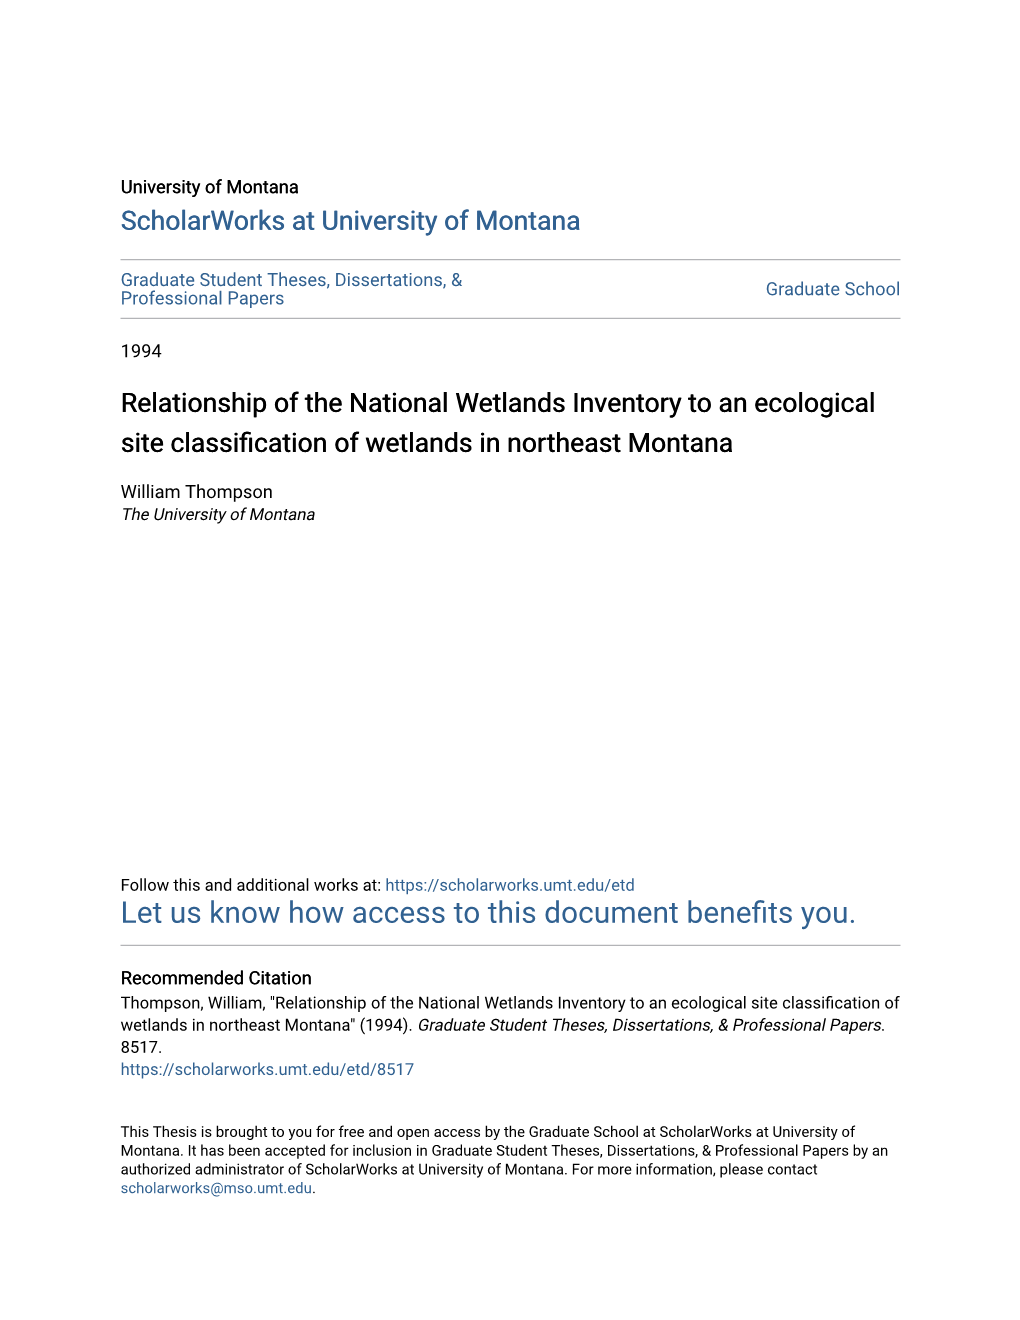 Relationship of the National Wetlands Inventory to an Ecological Site Classification of Wetlands in Northeast Montana